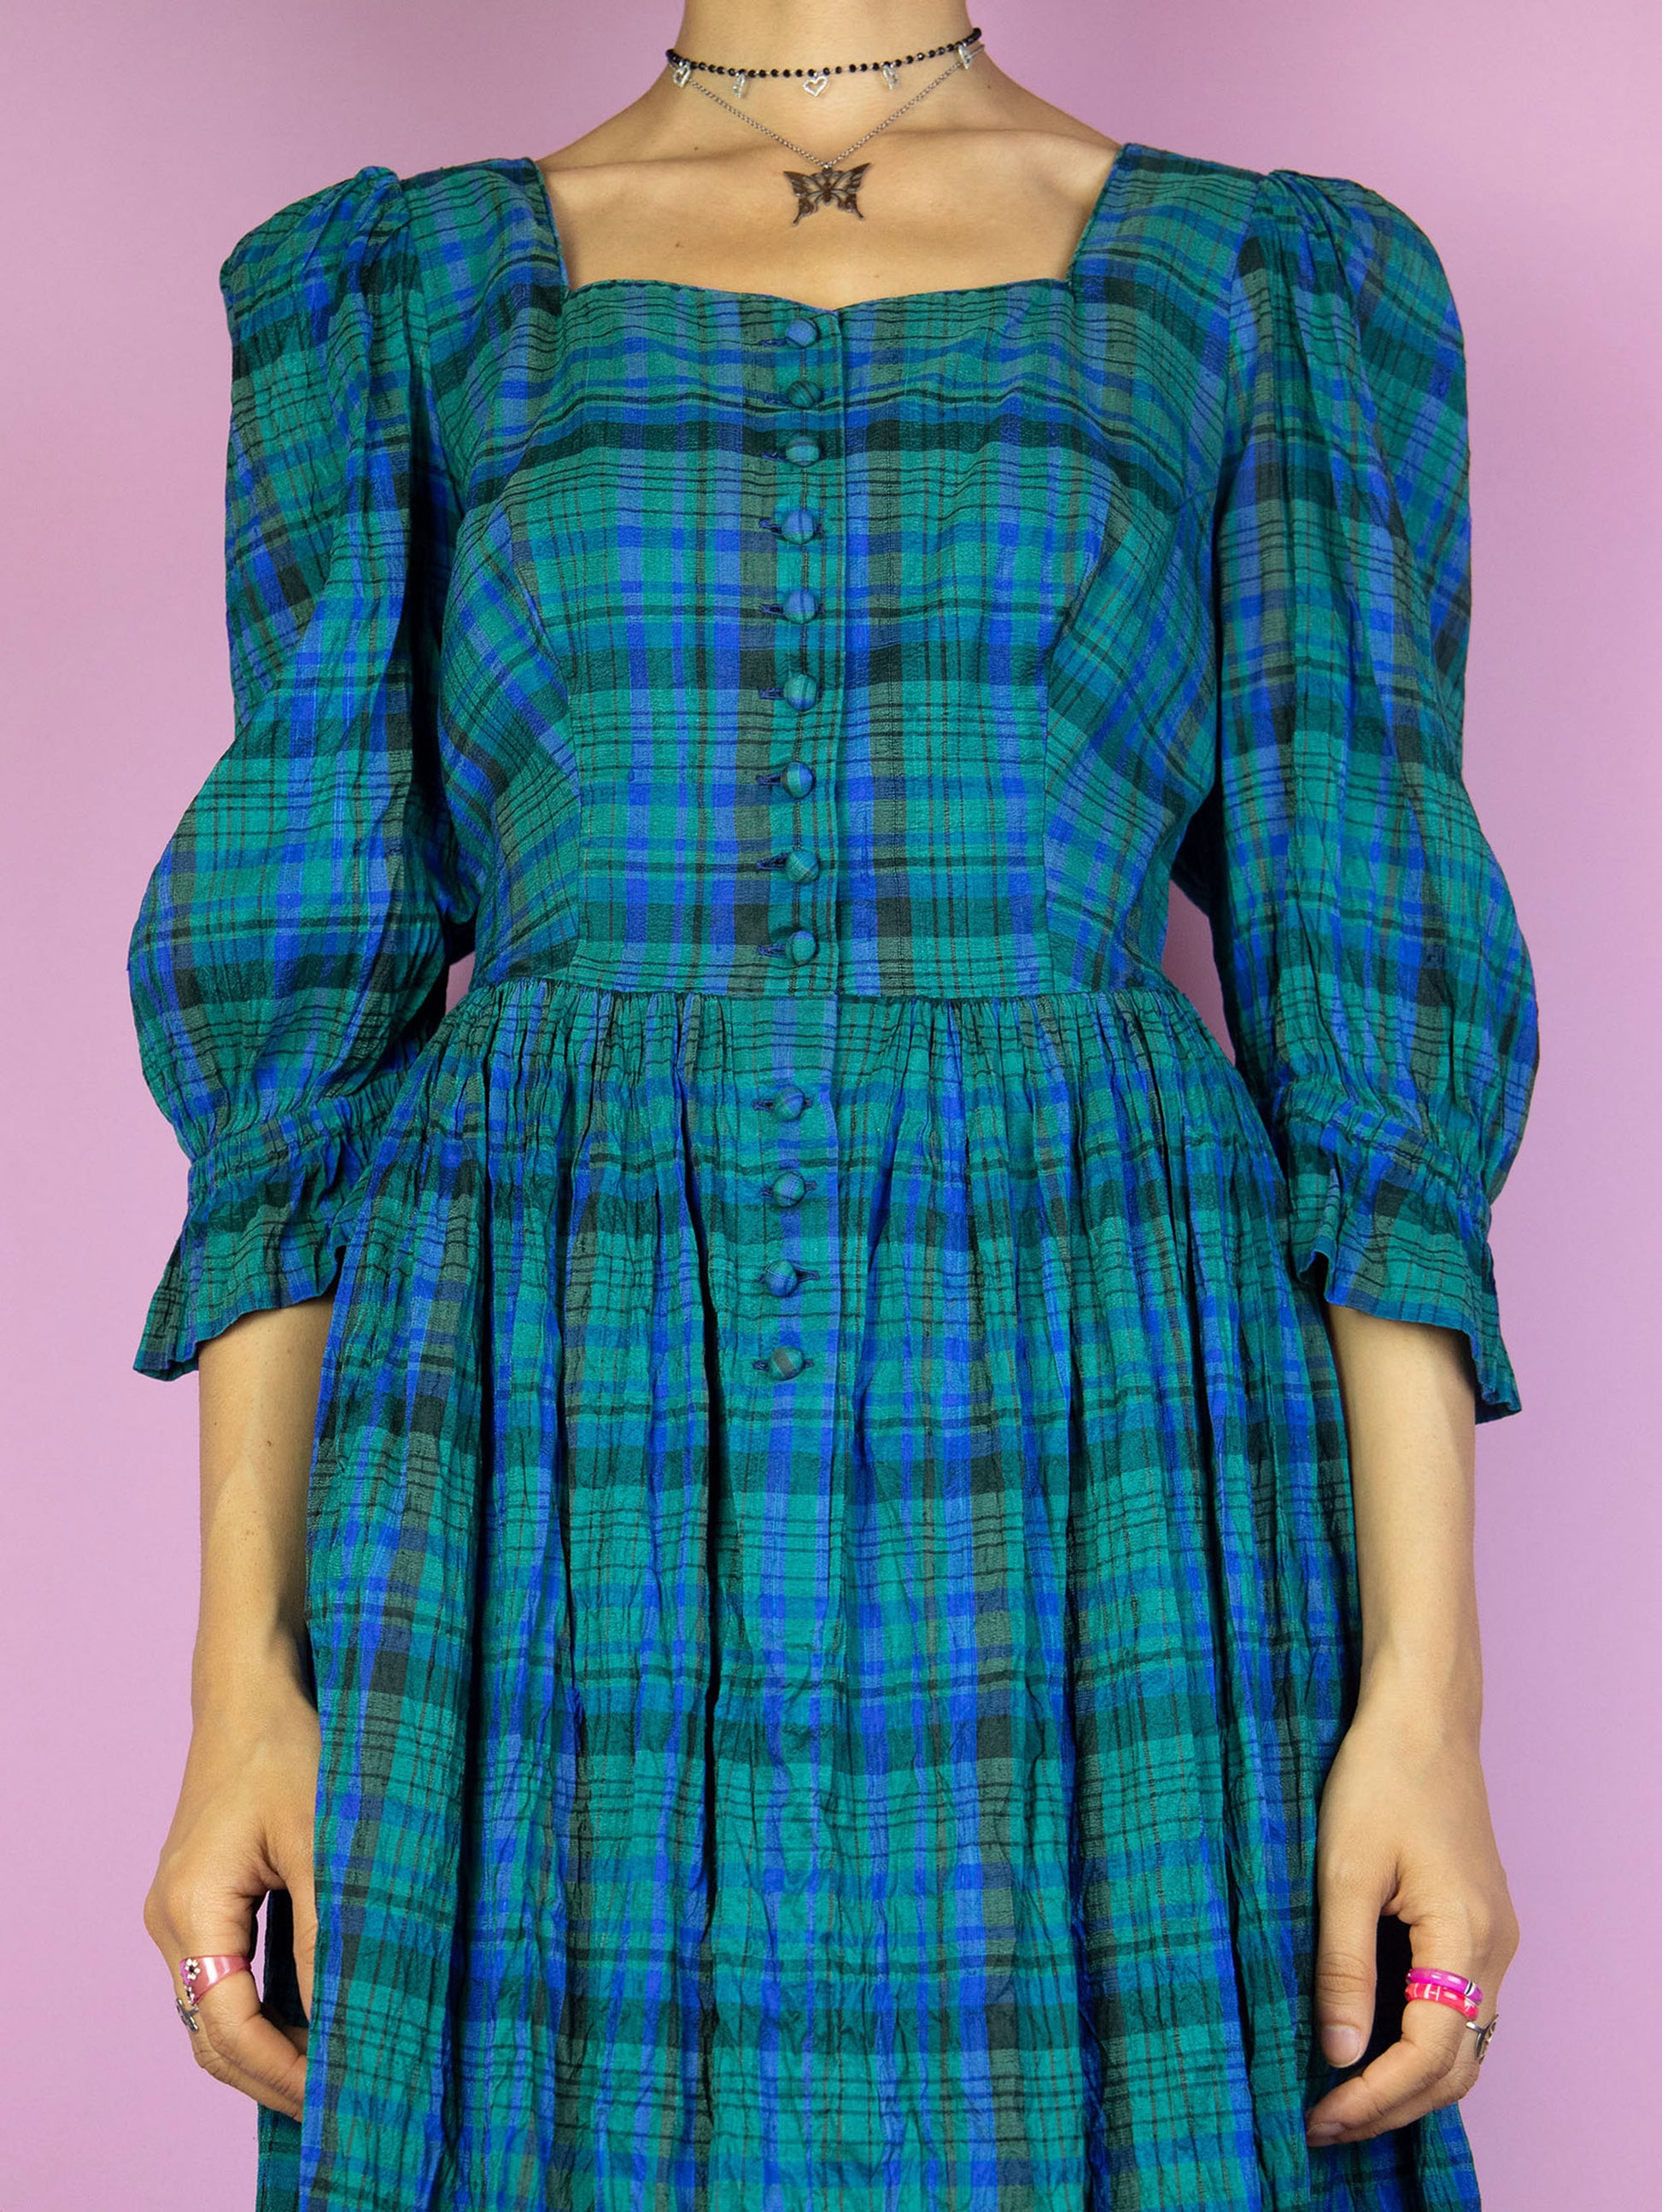 The Vintage 80s Cottage Plaid Midi Dress is a pleated blue and green check dress with puff sleeves and buttons. Boho country western 1980s prairie midi dress.